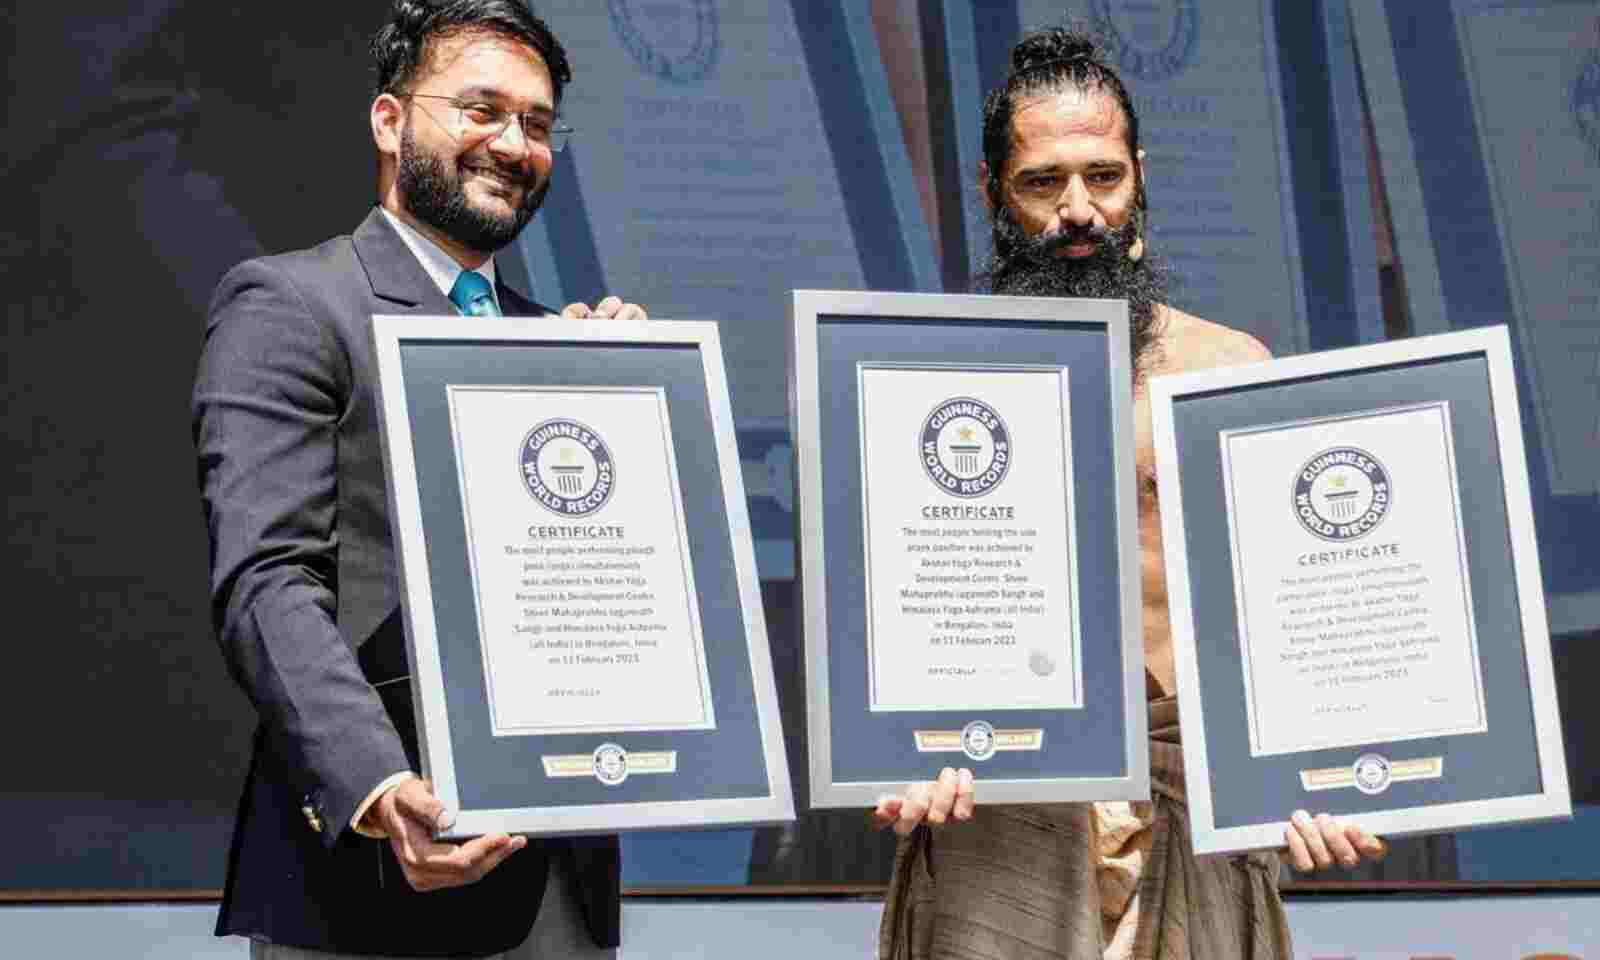 guinness book of world records: Watch: Over 5 lakh people perform yoga in  Karnataka to create new Guinness Book of World Records - The Economic Times  Video